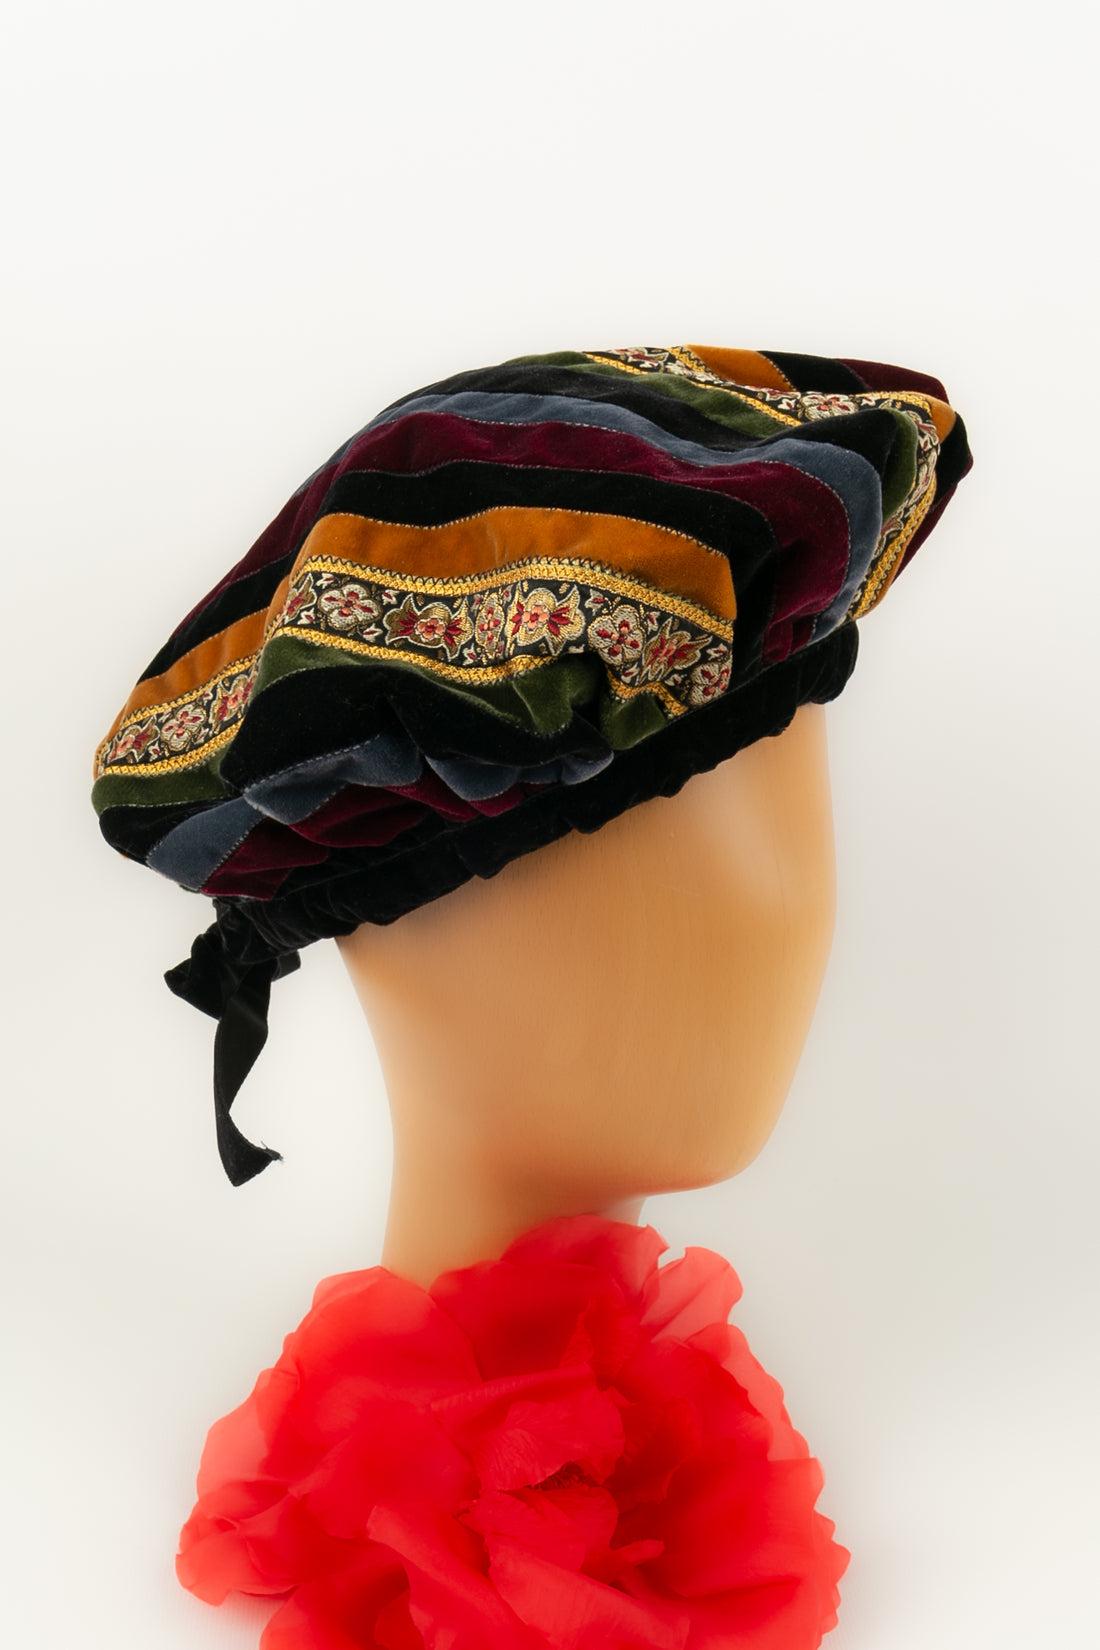 Yves Saint Laurent -(Made in France) Velvet striped beret.

Additional information: 
Dimensions: Circumference: about 64 cm
Condition: Very good condition
Seller Ref number: CHP30